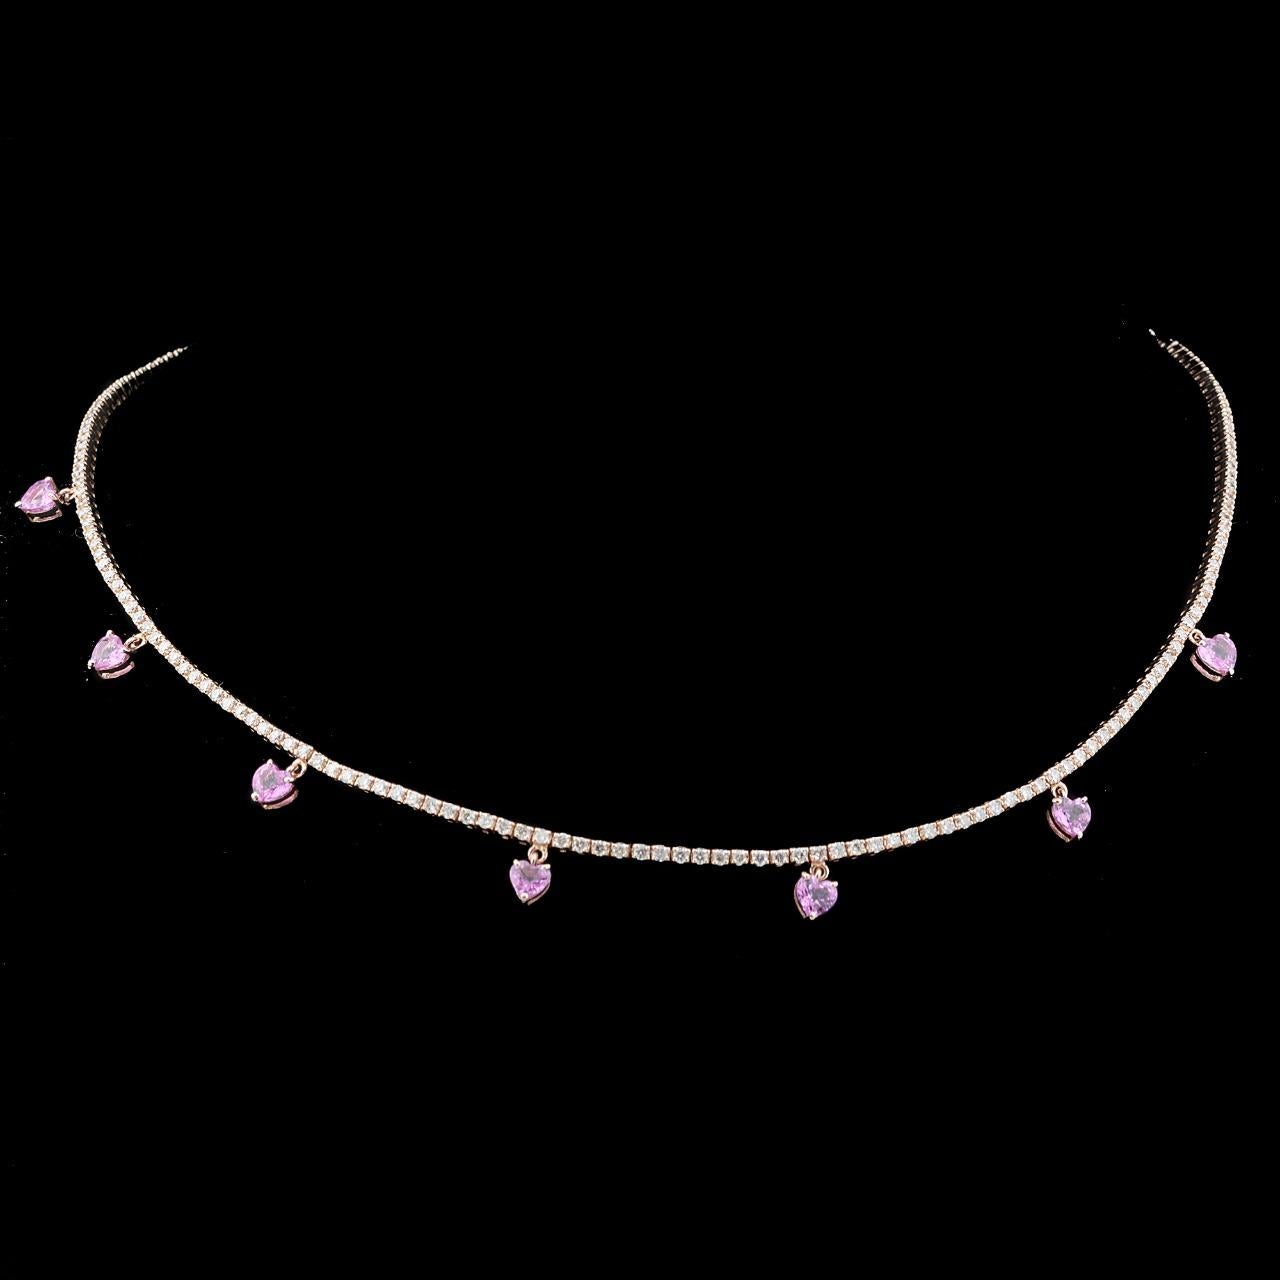 Cast from 14-karat gold, this  necklace is hand set with 2.32 carats Pink Sapphire and 1.25 carats of sparkling diamonds.  See other matching pieces.

FOLLOW MEGHNA JEWELS storefront to view the latest collection & exclusive pieces. Meghna Jewels is